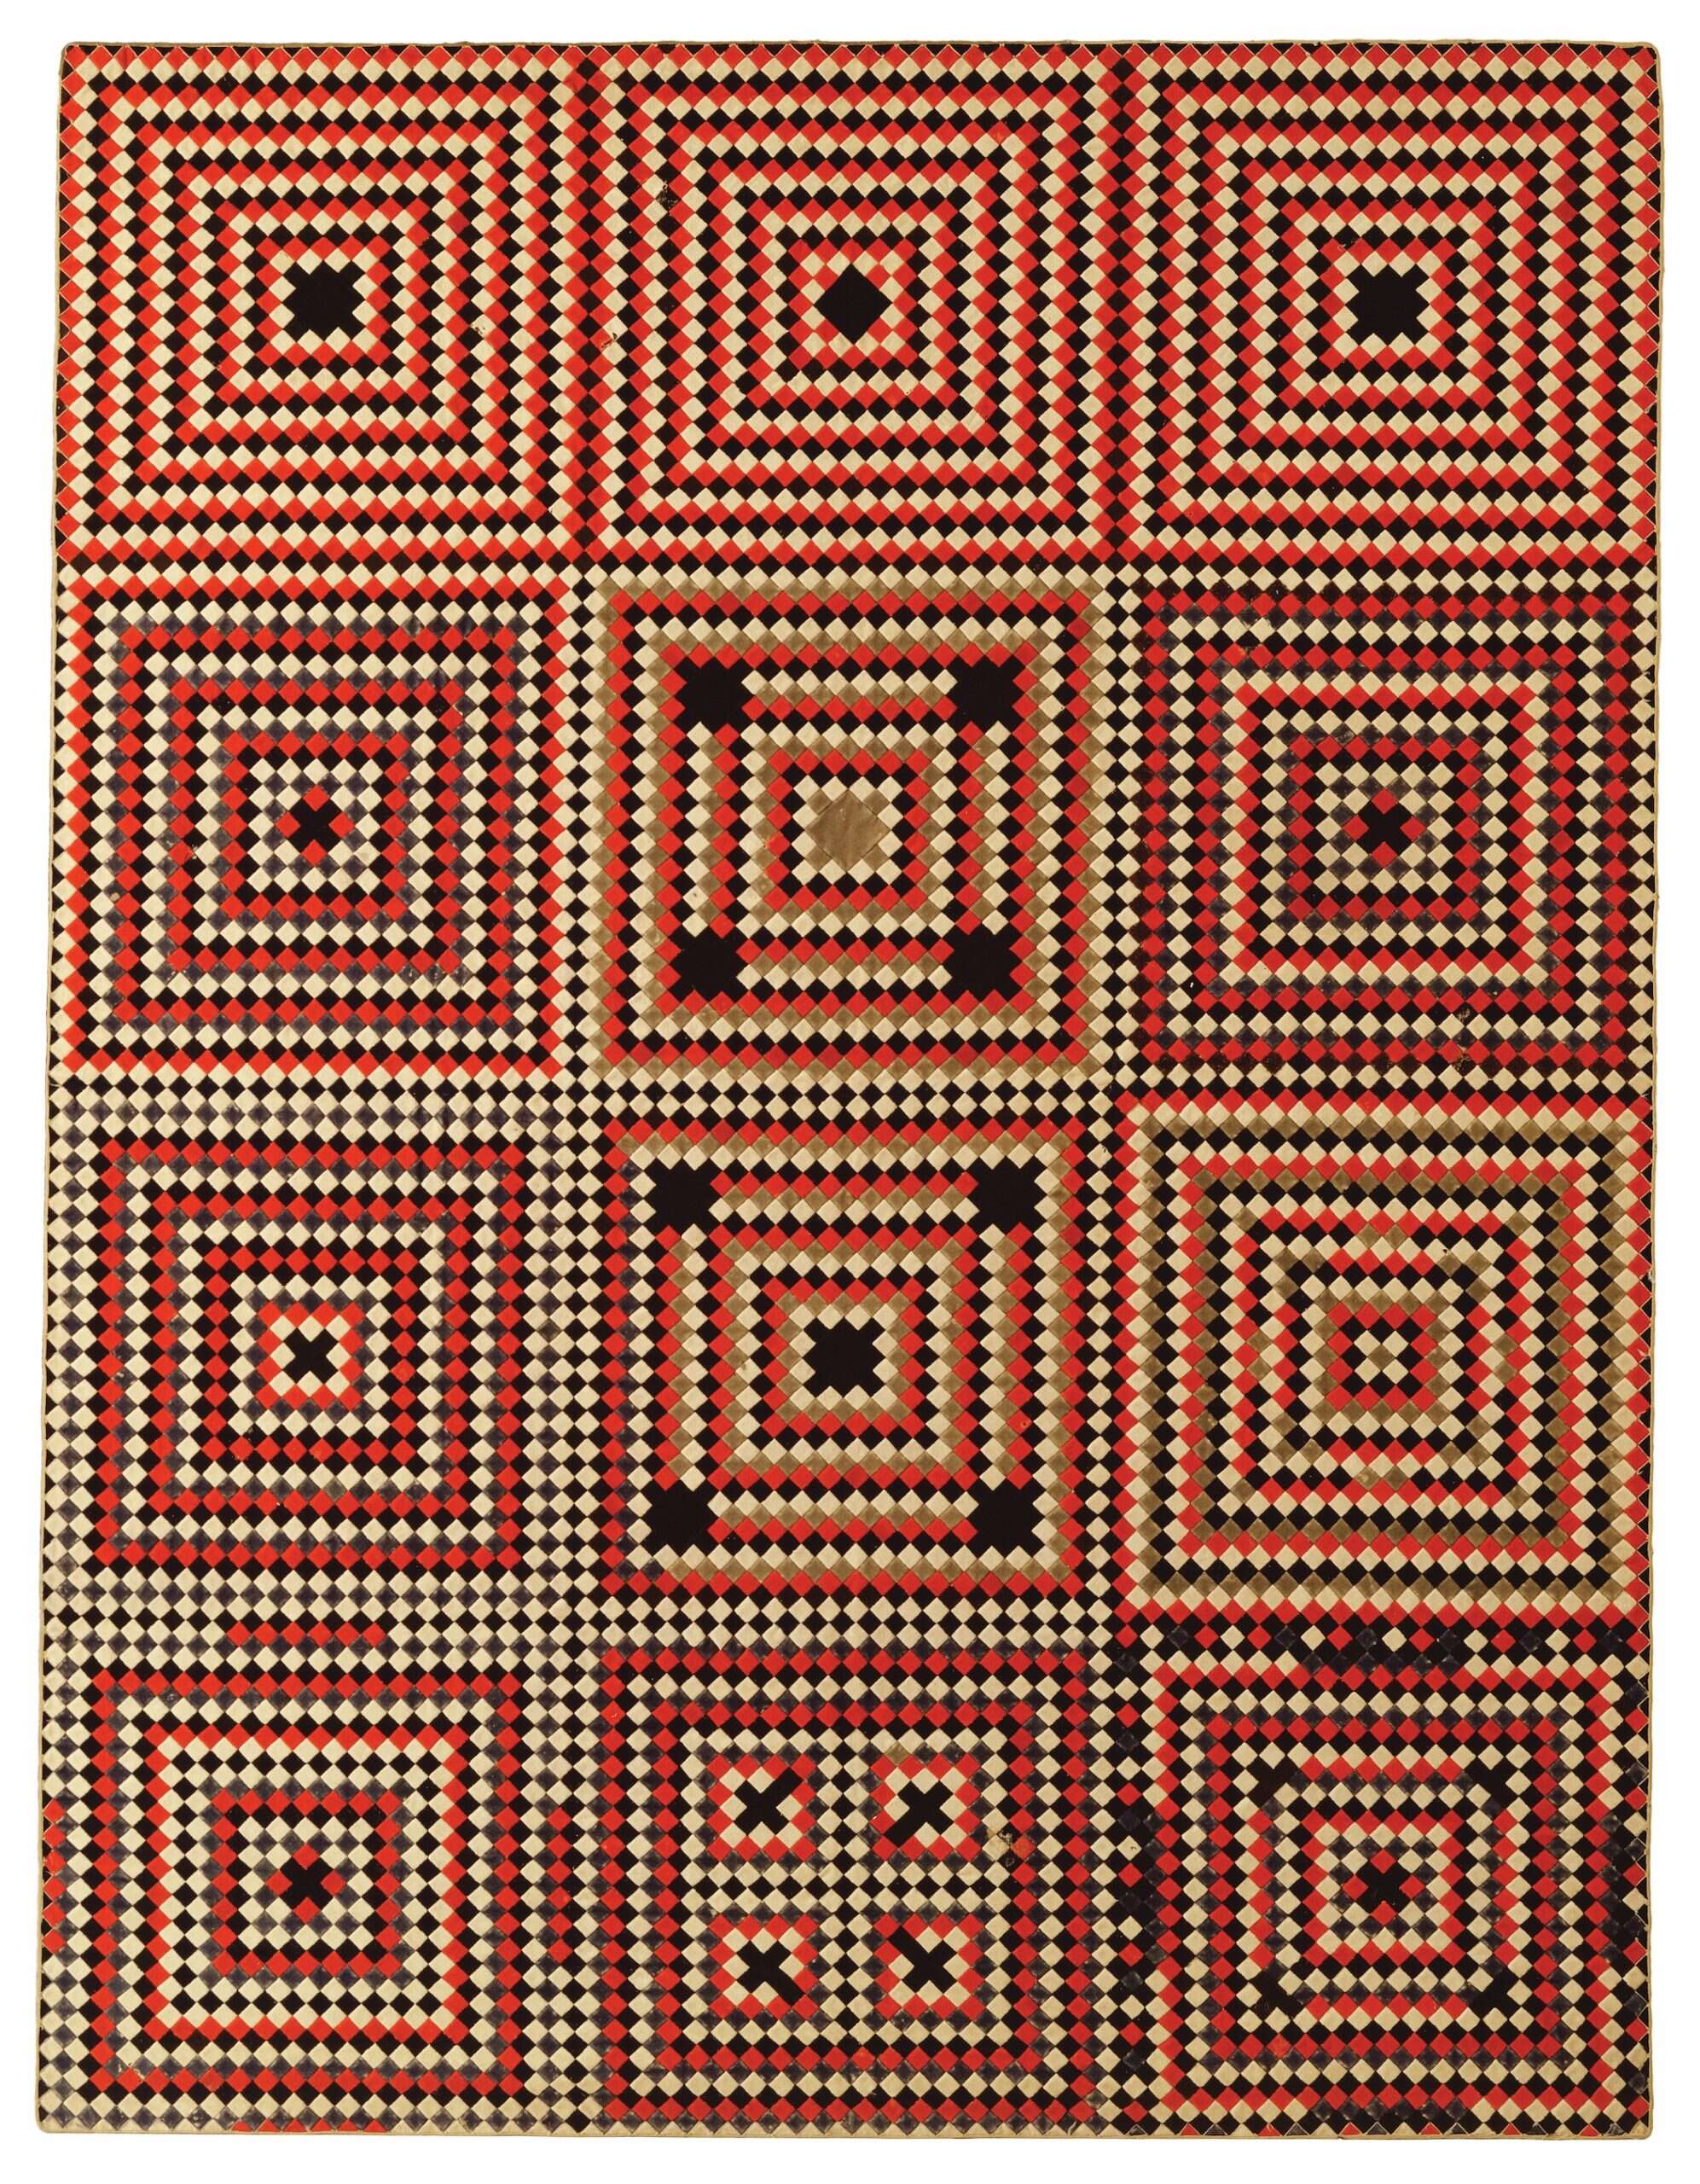 Soldier’s Quilt: Square Within a Square